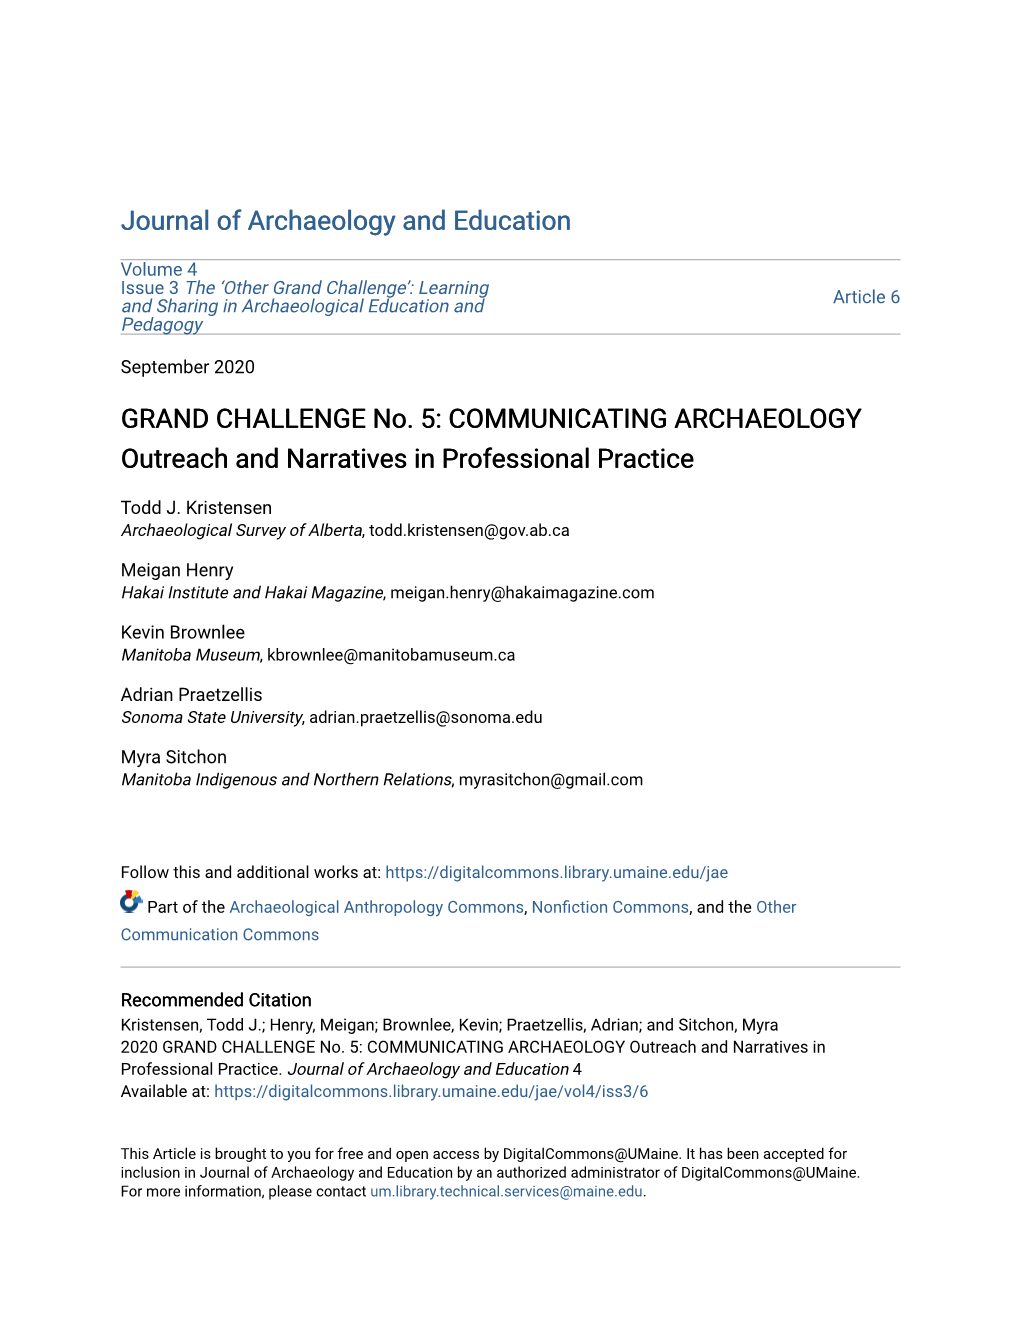 COMMUNICATING ARCHAEOLOGY Outreach and Narratives in Professional Practice